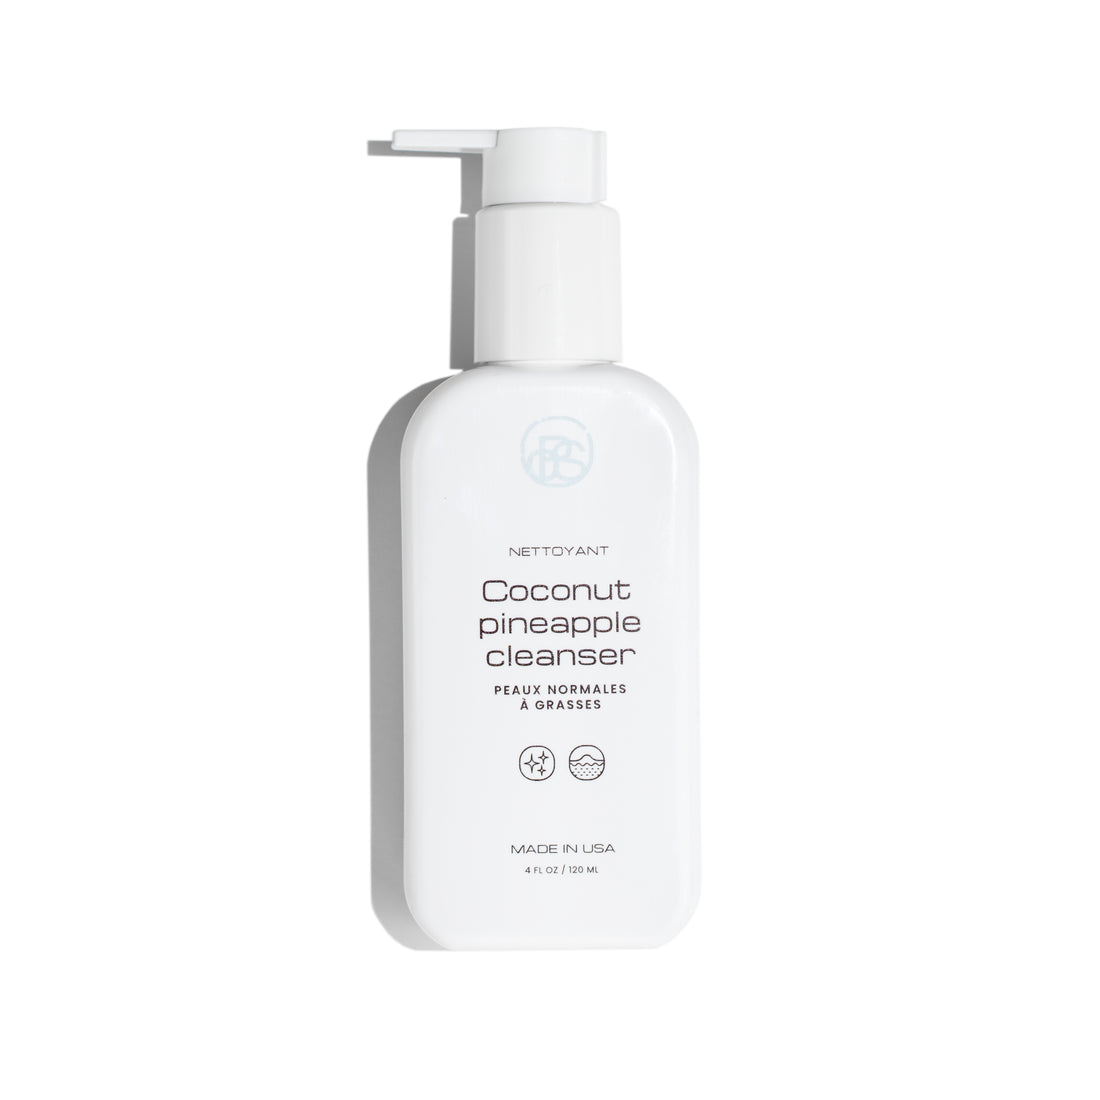 Coconut pineapple cleanser